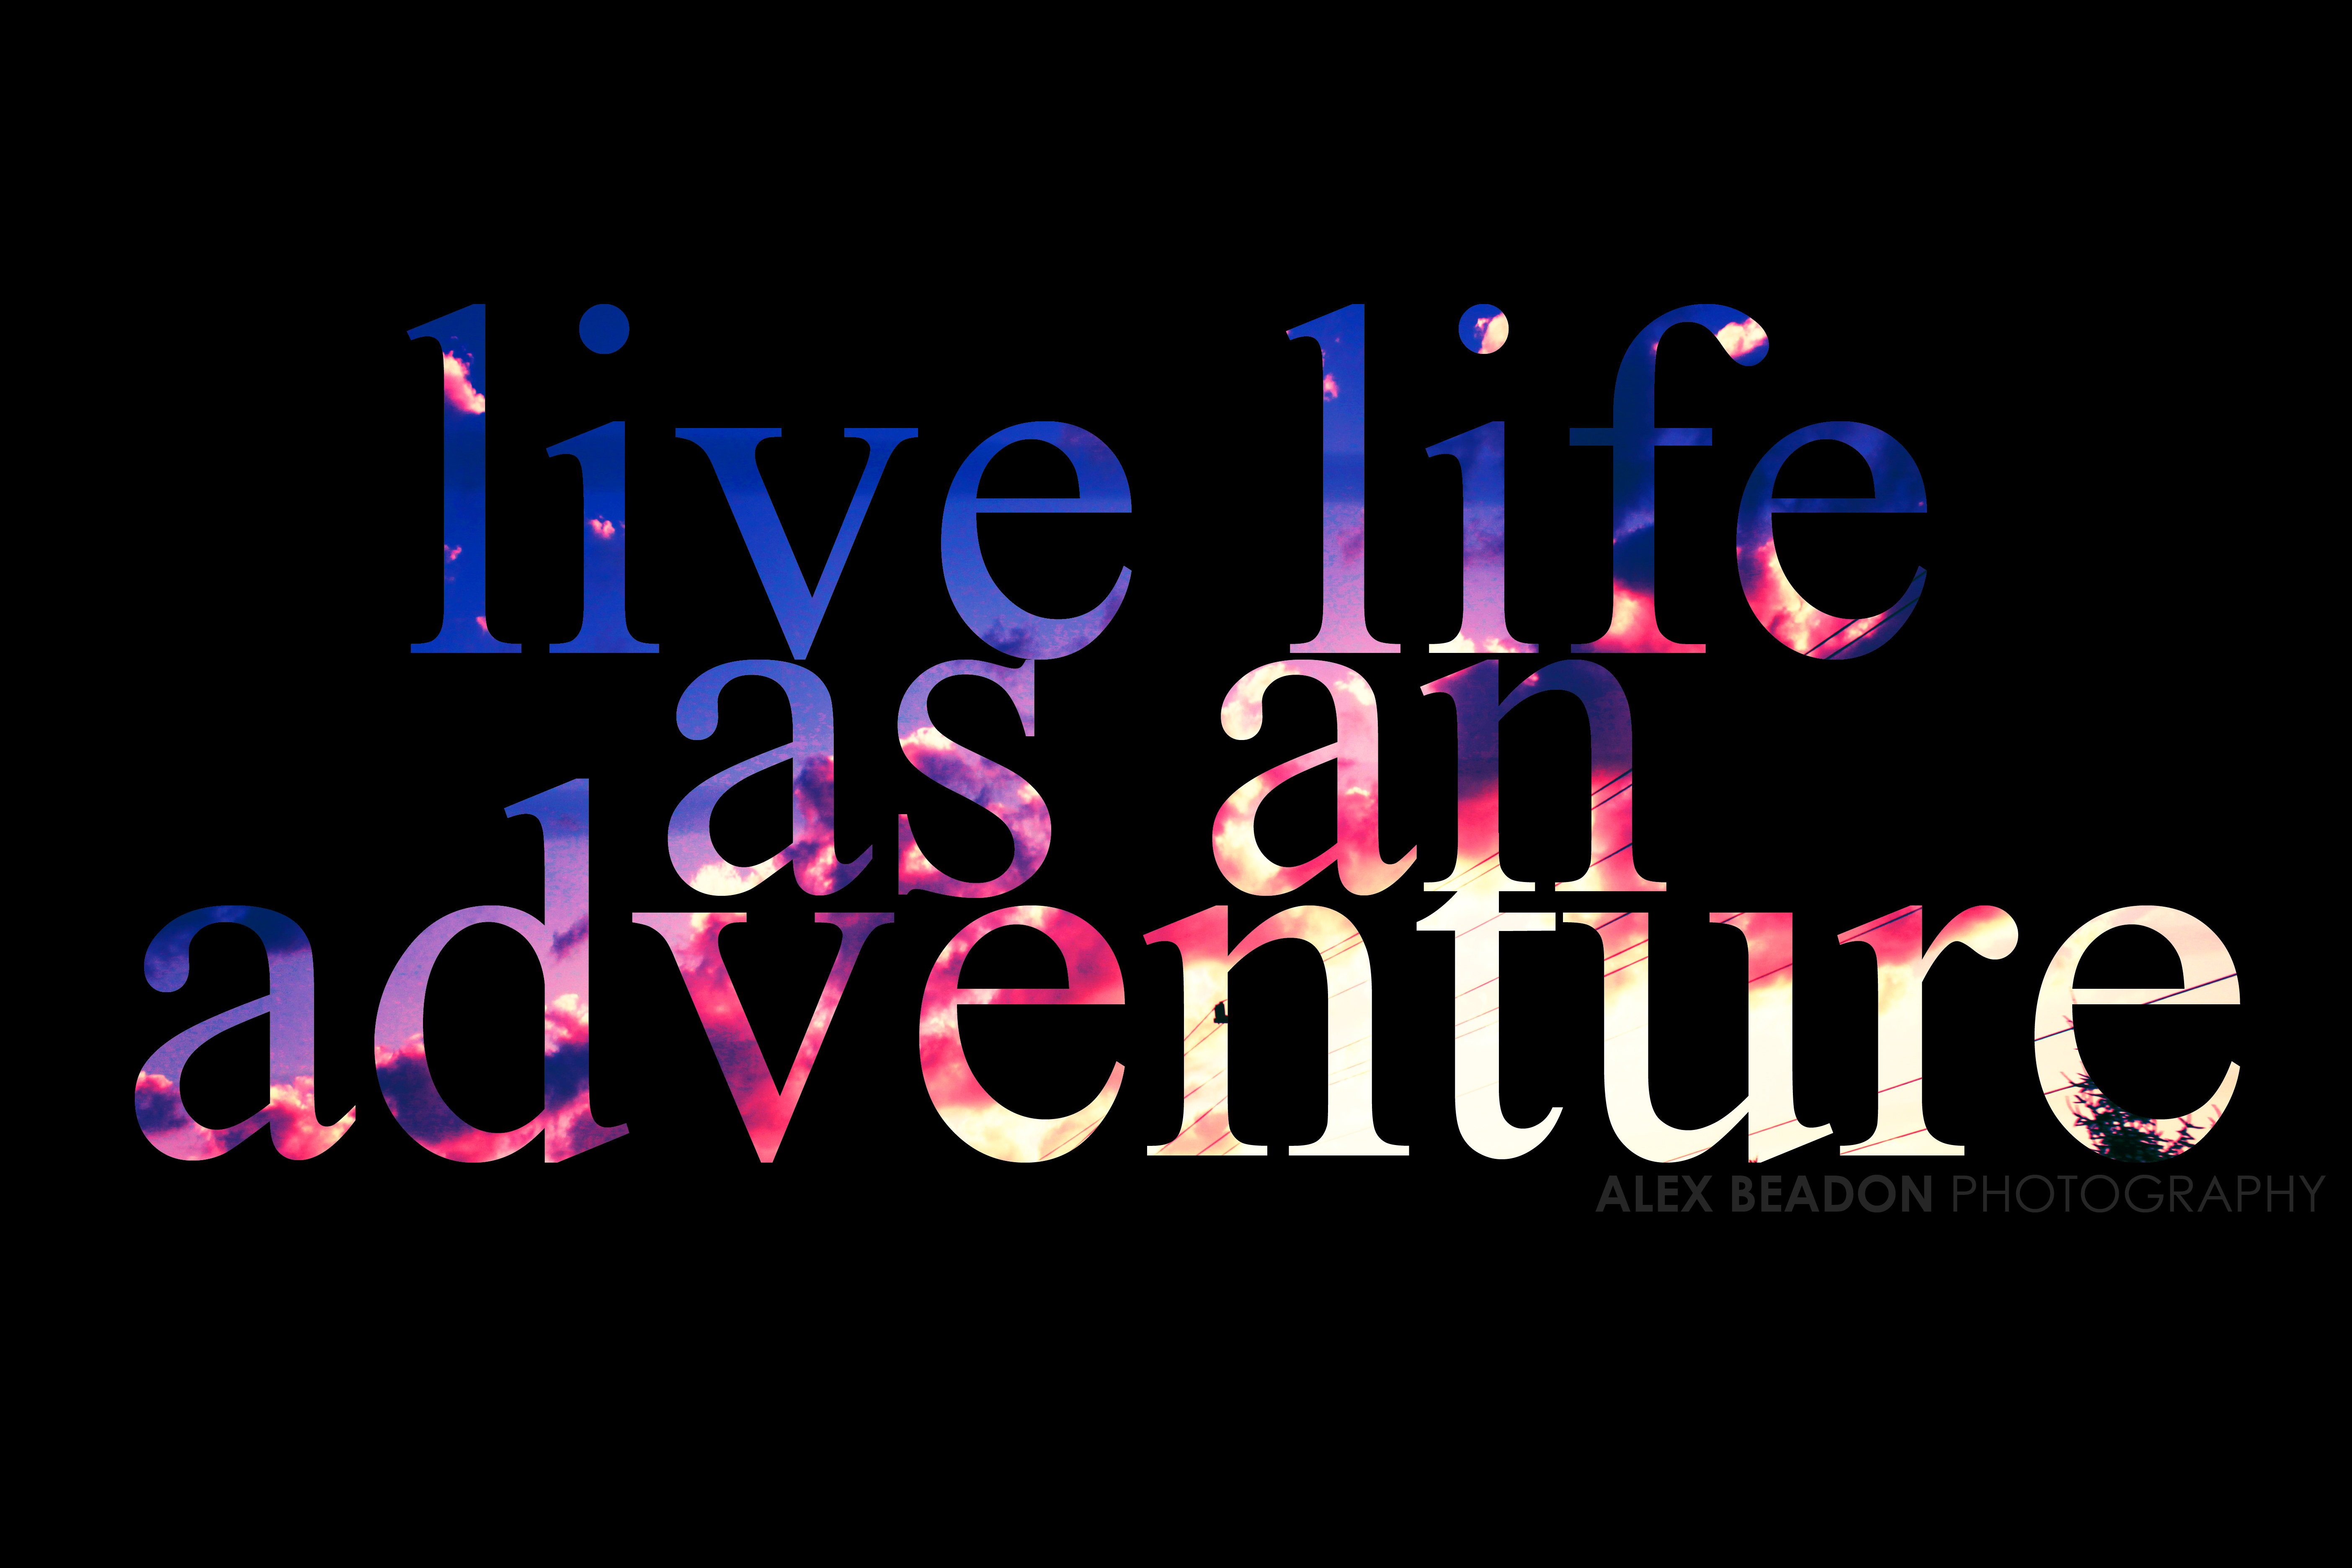 Live Life картинки. Live the Life. Live is Life. My own life